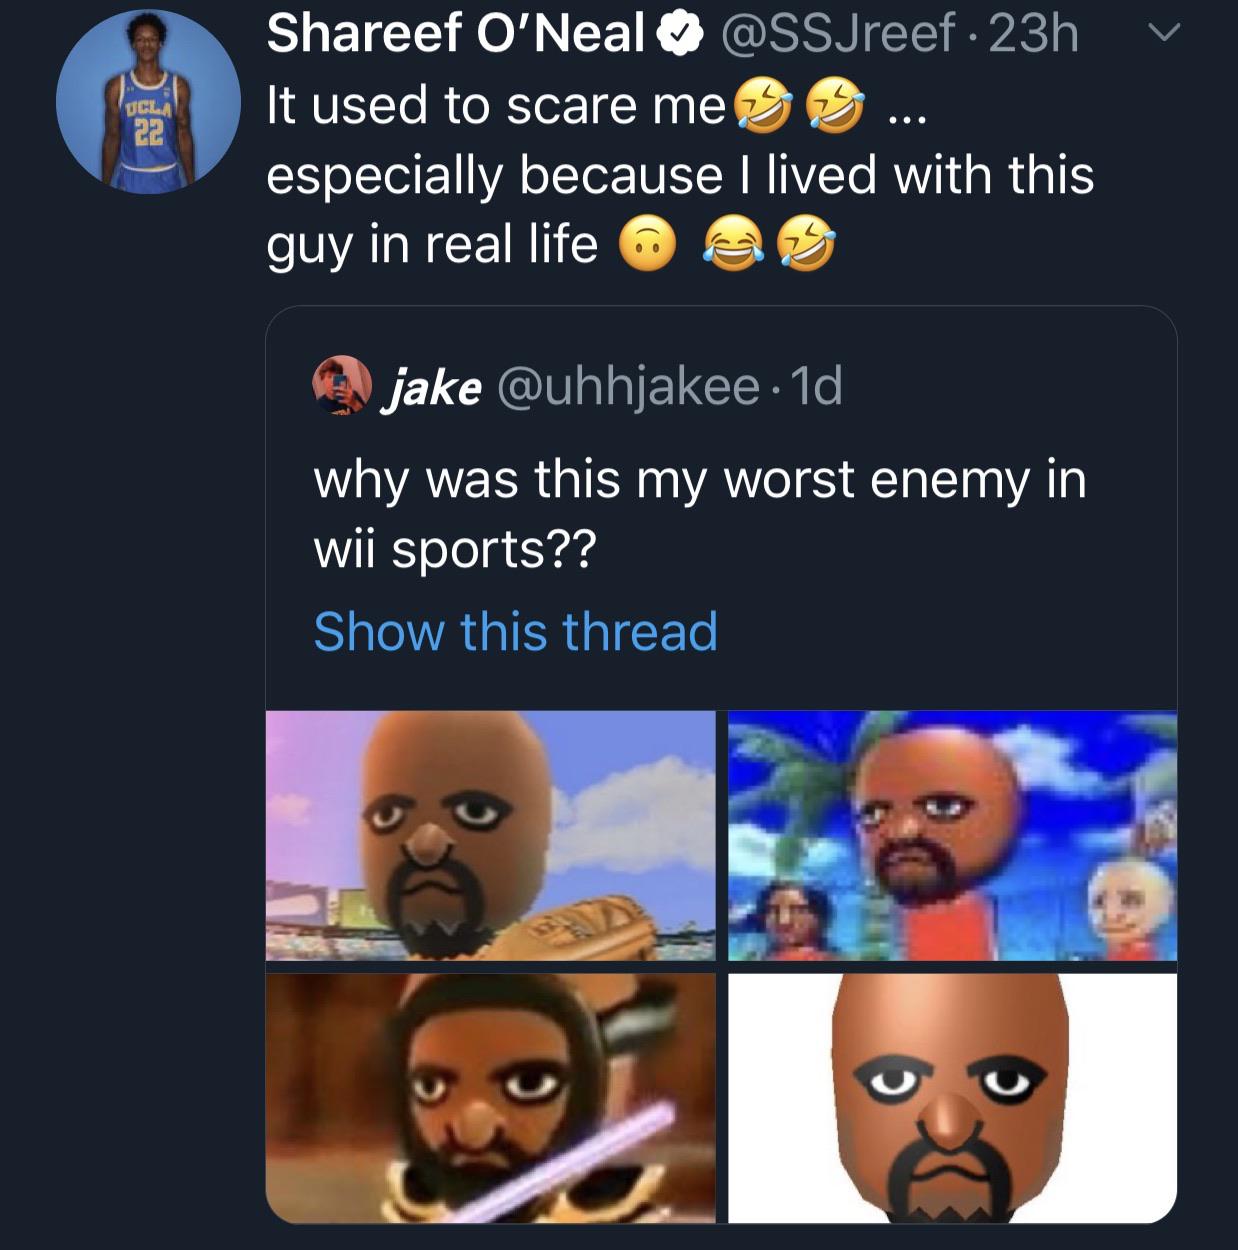 screenshot - v ef O'Neal 23h It used to scare me especially because I lived with this guy in real life As jake . 1d why was this my worst enemy in wii sports?? Show this thread